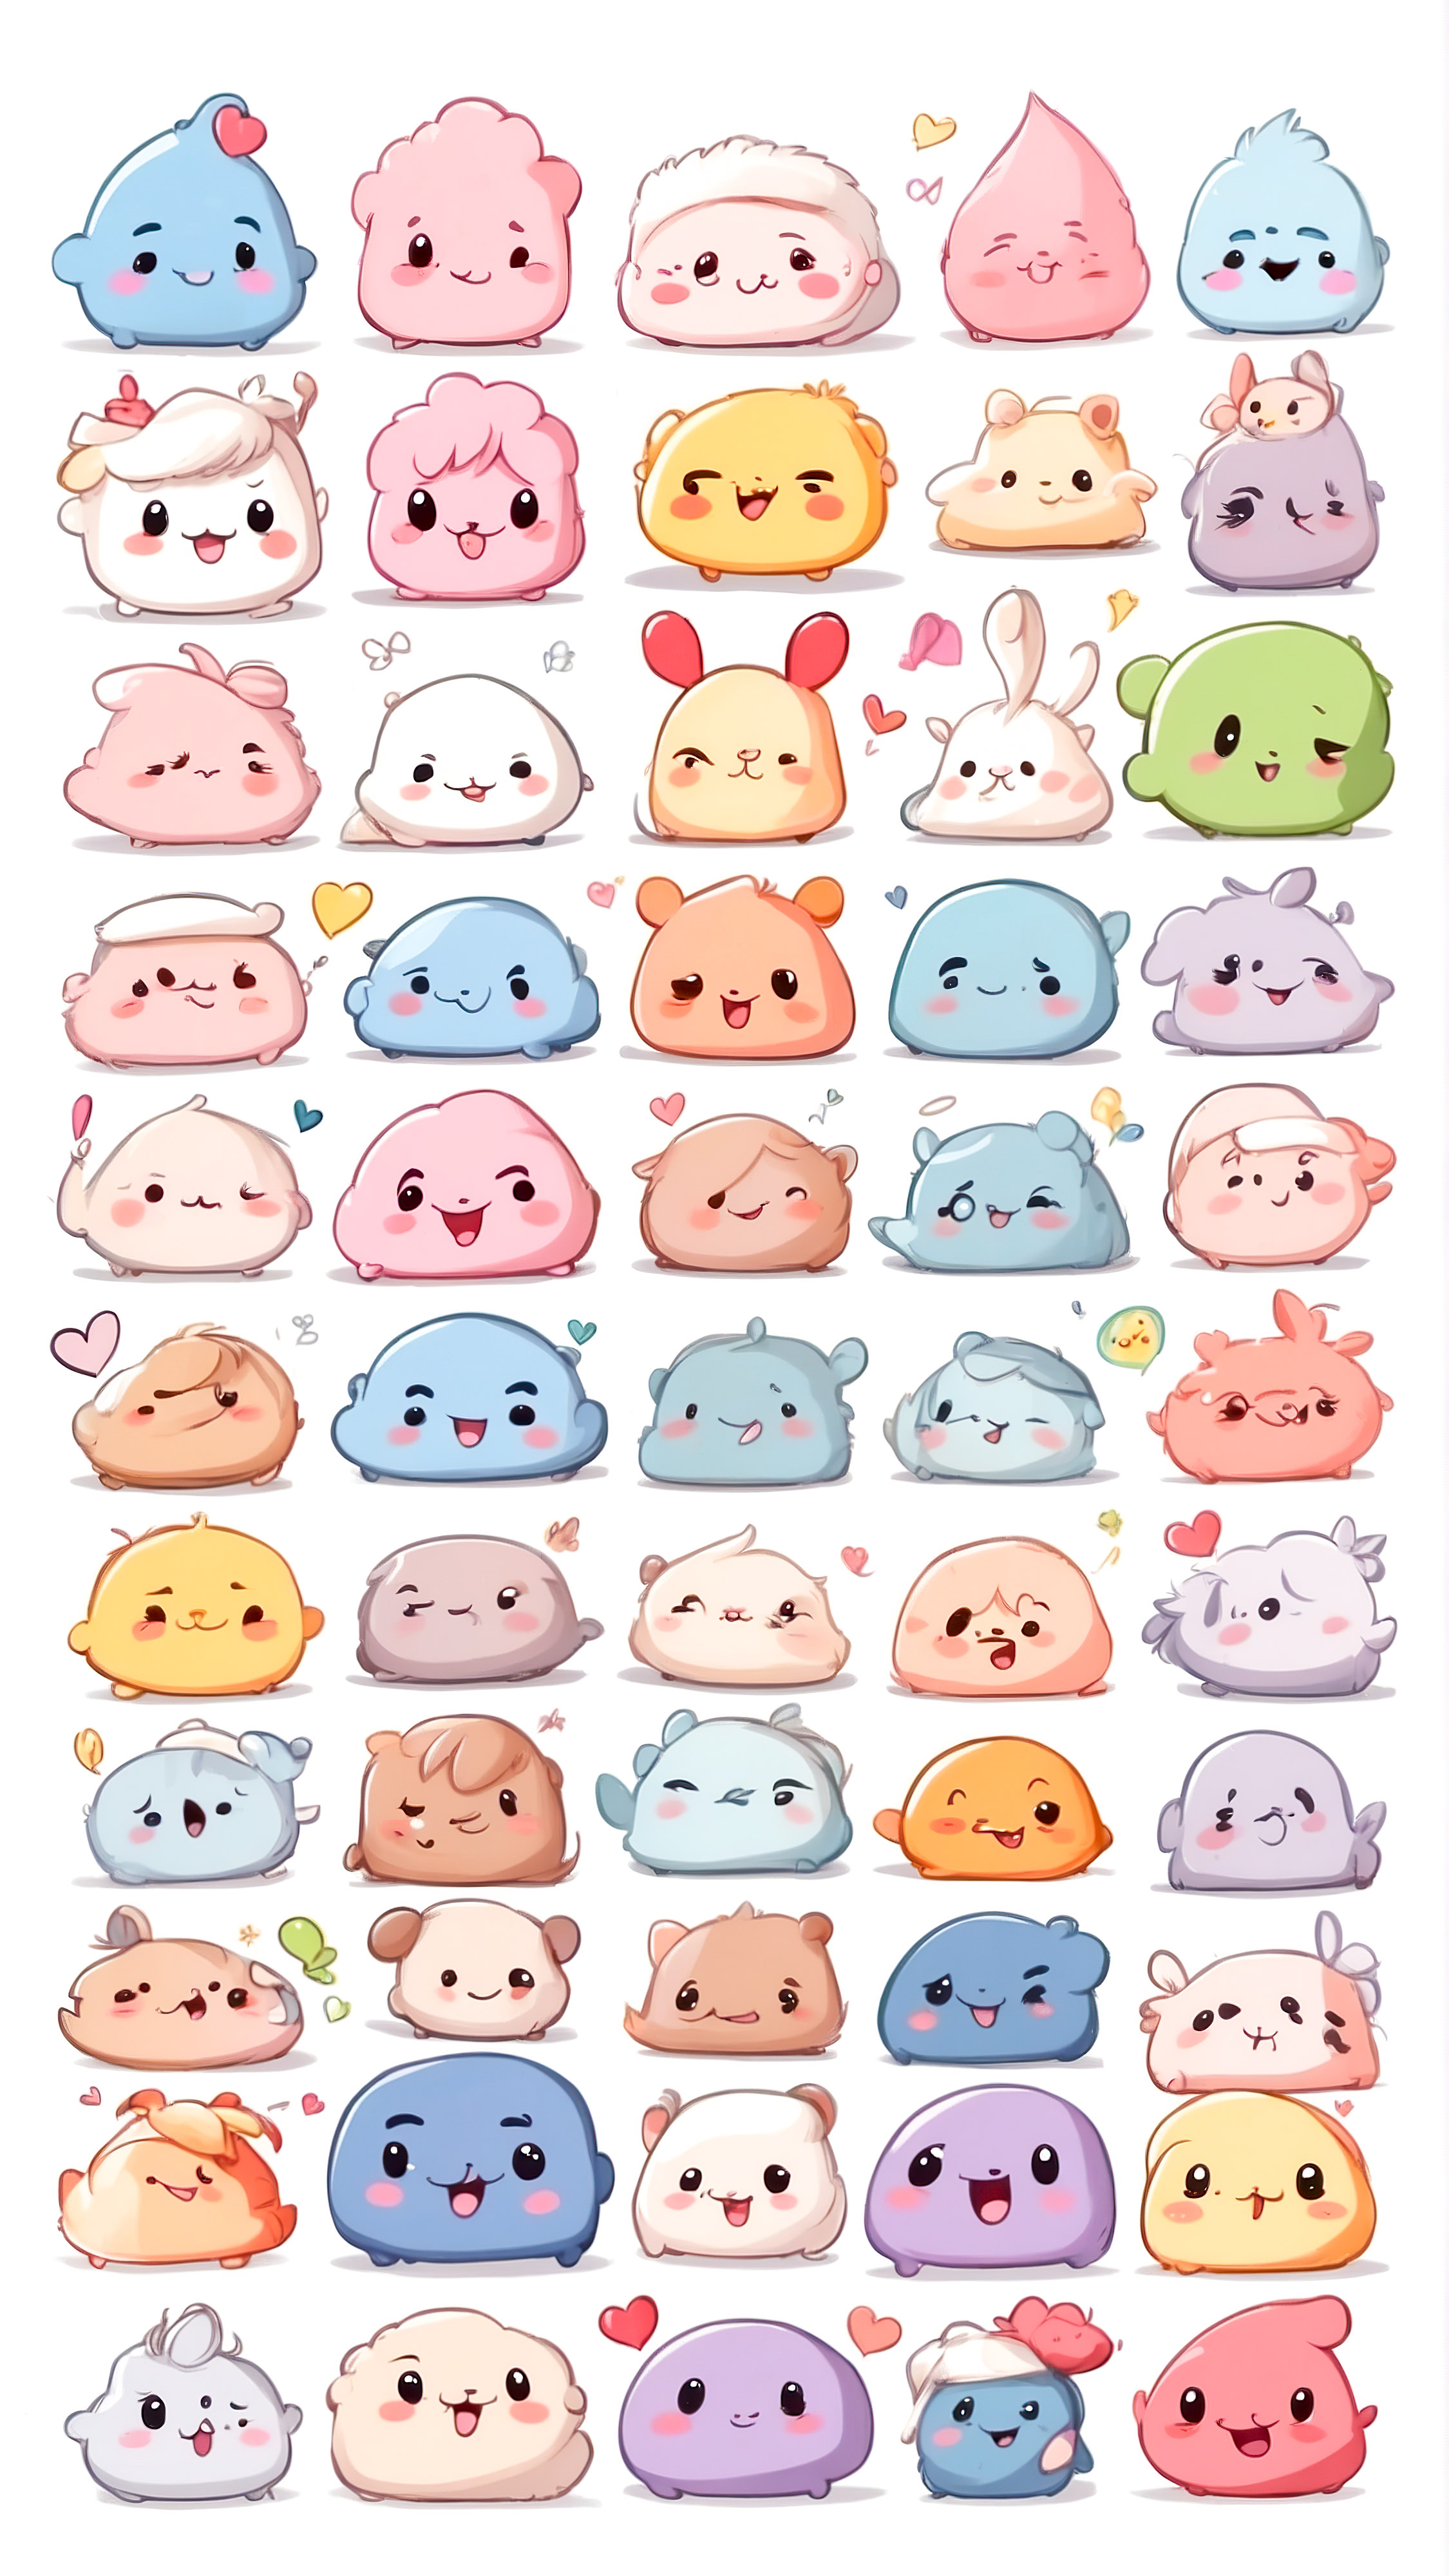 Get lost in the magic of our iPhone kawaii wallpaper, filled with numerous small, cute kawaii characters of unique colors and facial expressions in a simplistic and adorable design.